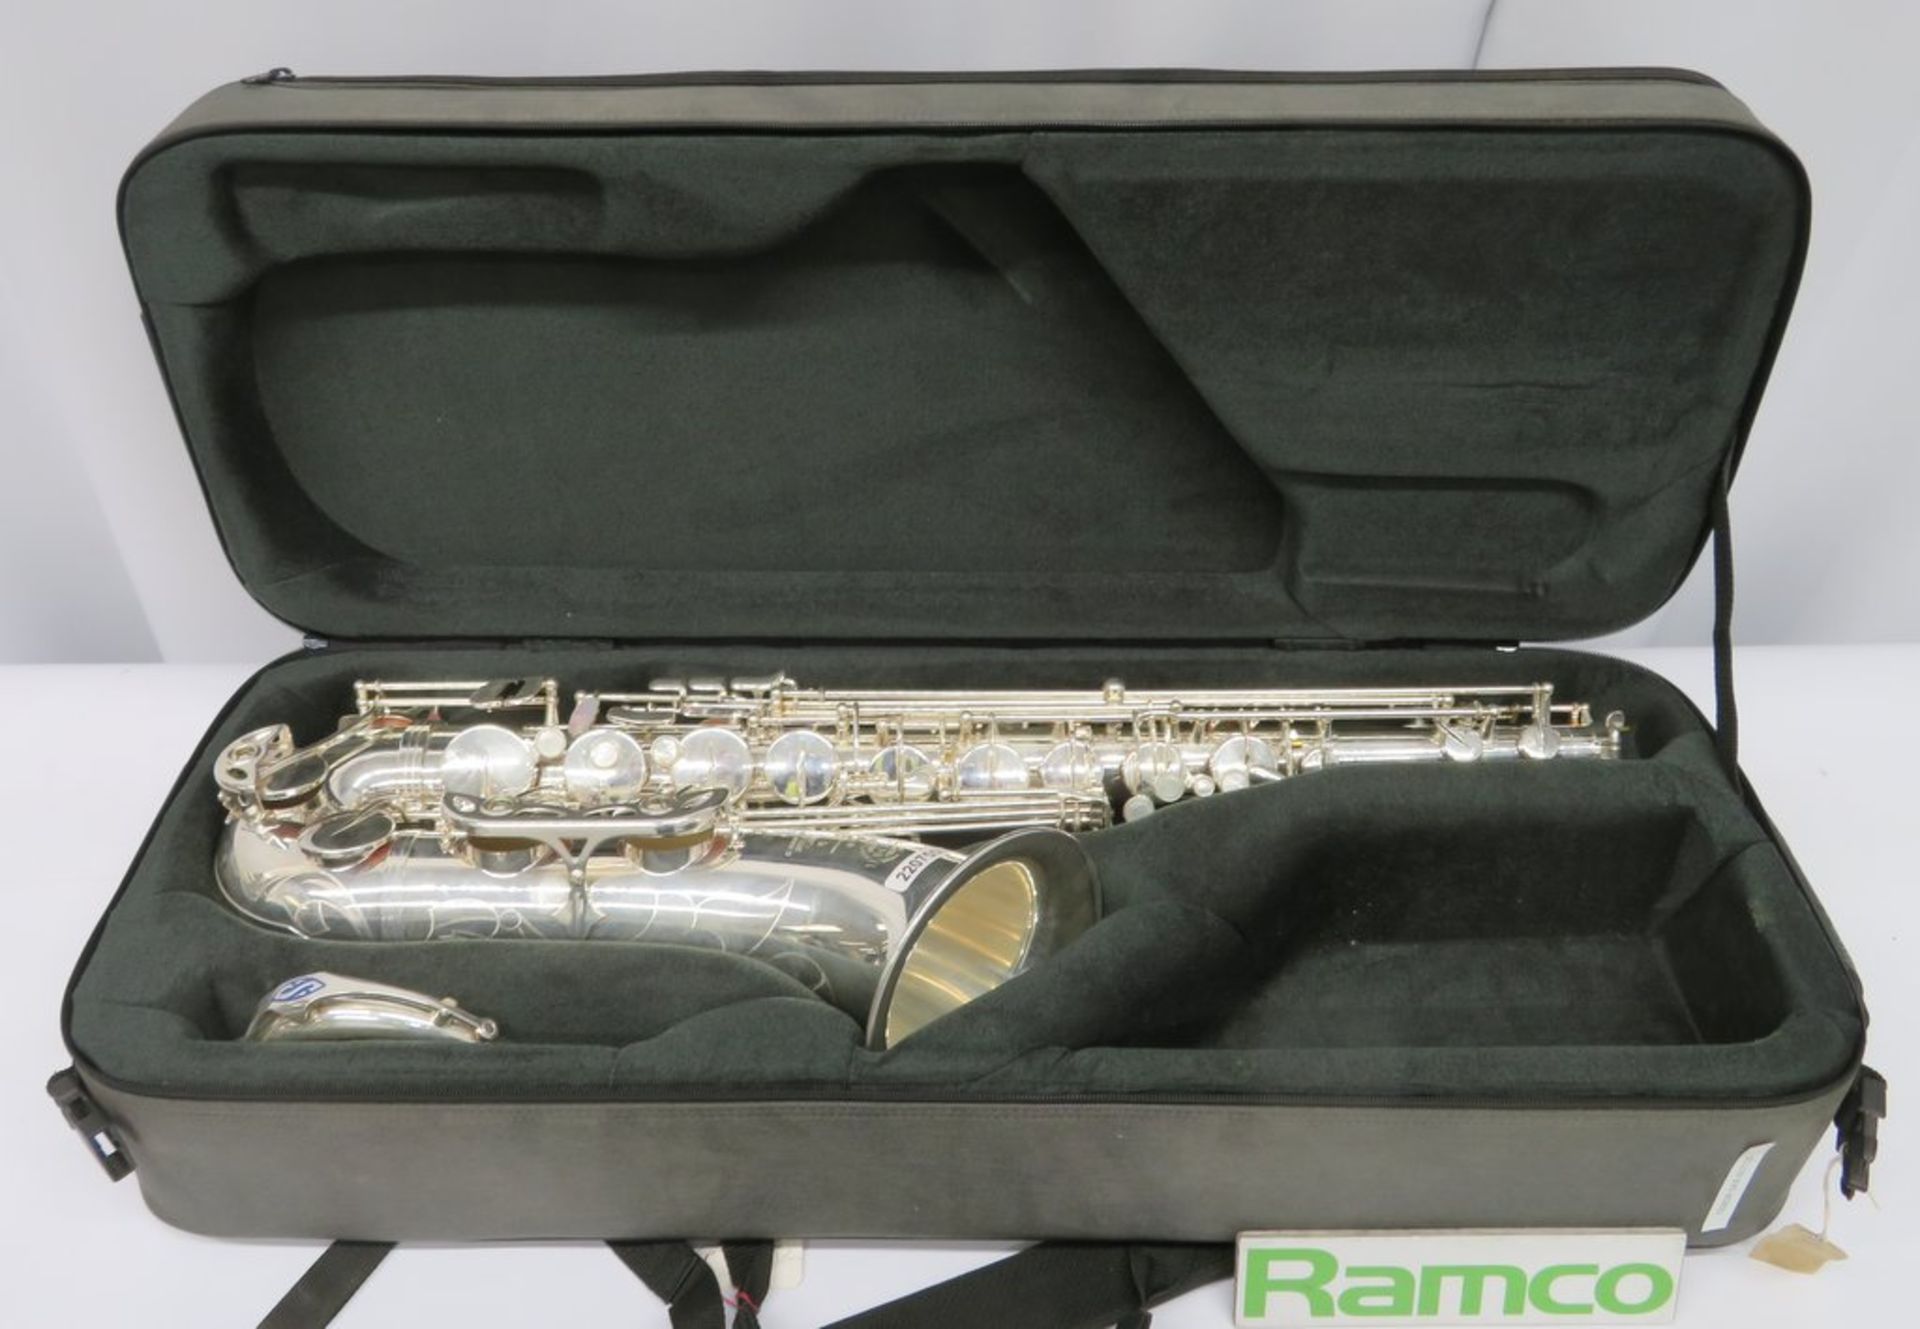 Henri Selmer Super Action 80 Serie 2 Tenor Saxophone With Case. Serial Number: N.607728.